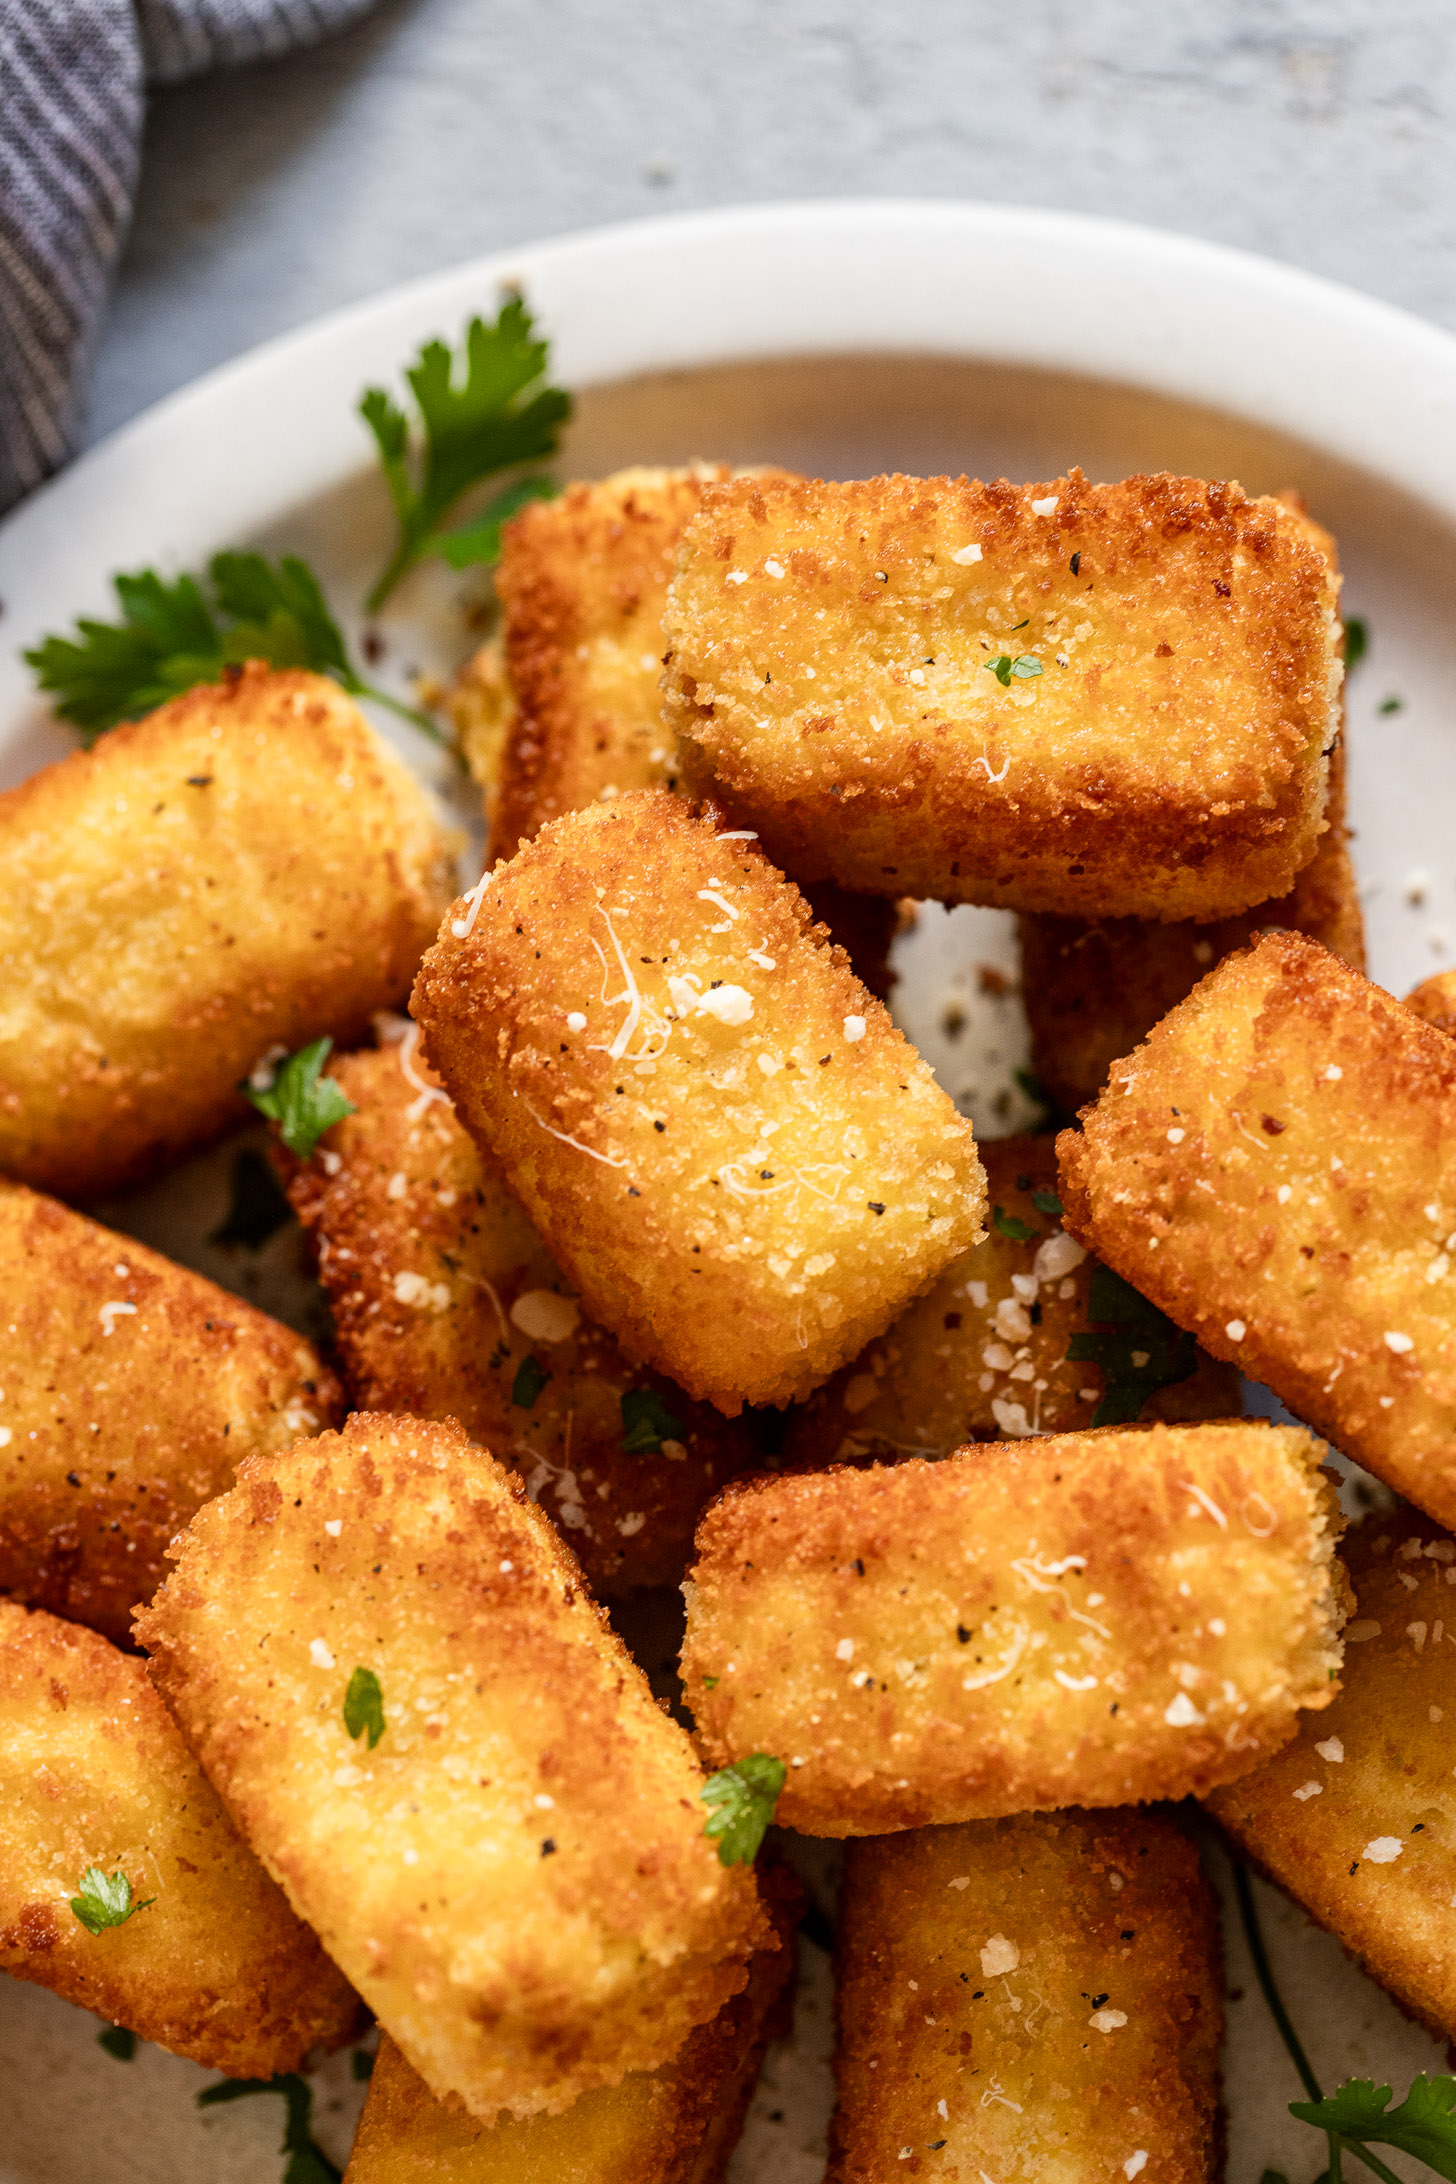 Plate of potato croquettes with parmesan cheese and parsley.